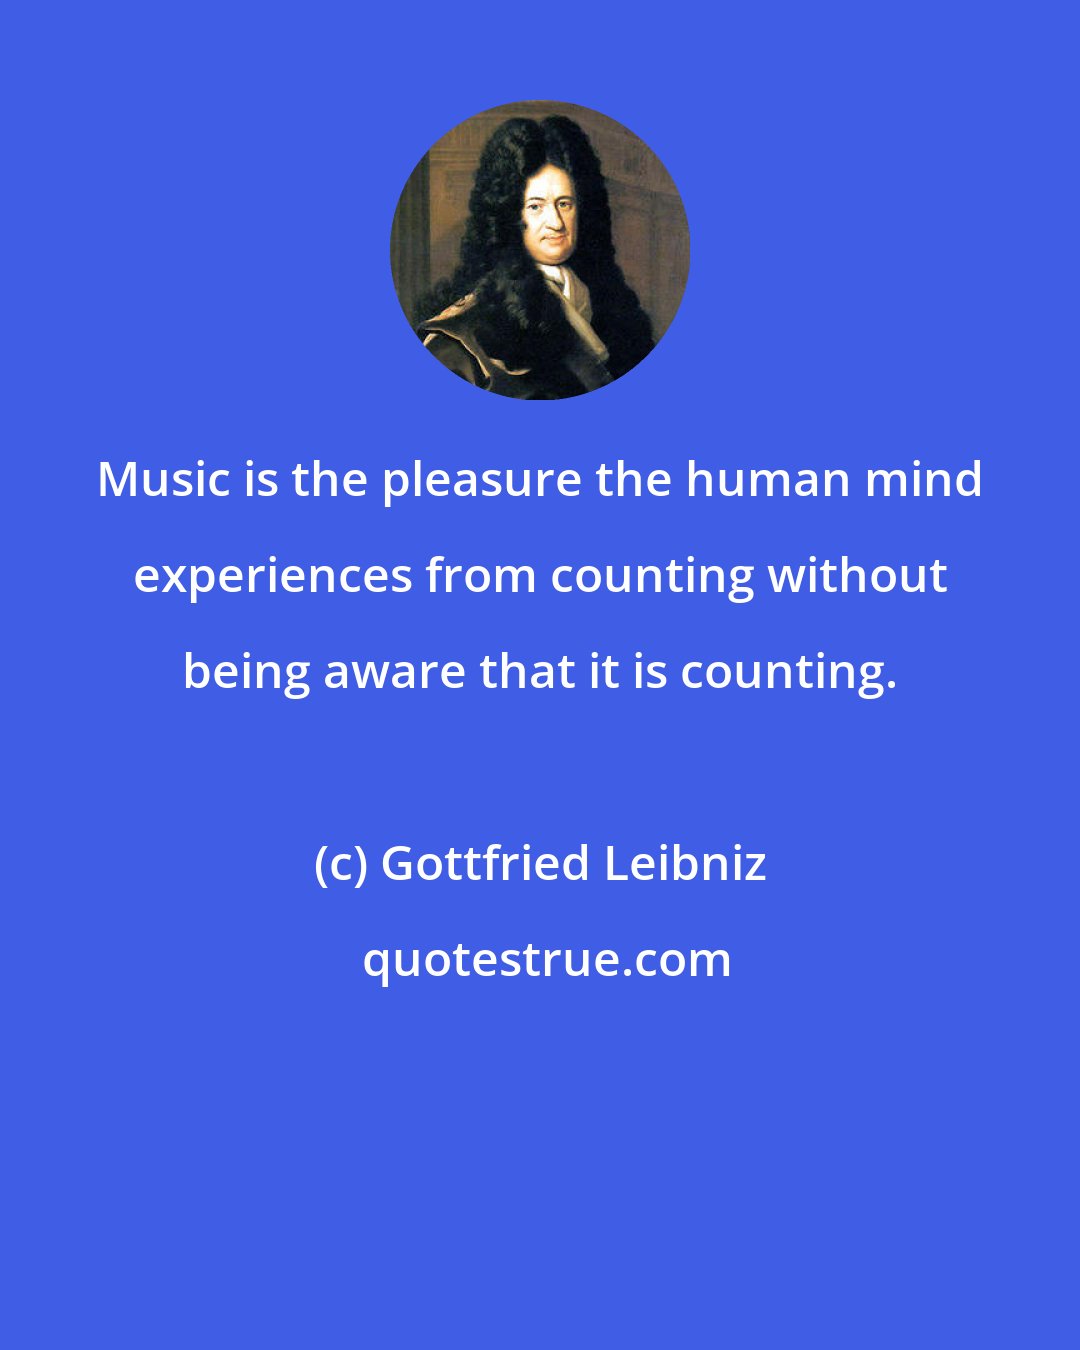 Gottfried Leibniz: Music is the pleasure the human mind experiences from counting without being aware that it is counting.